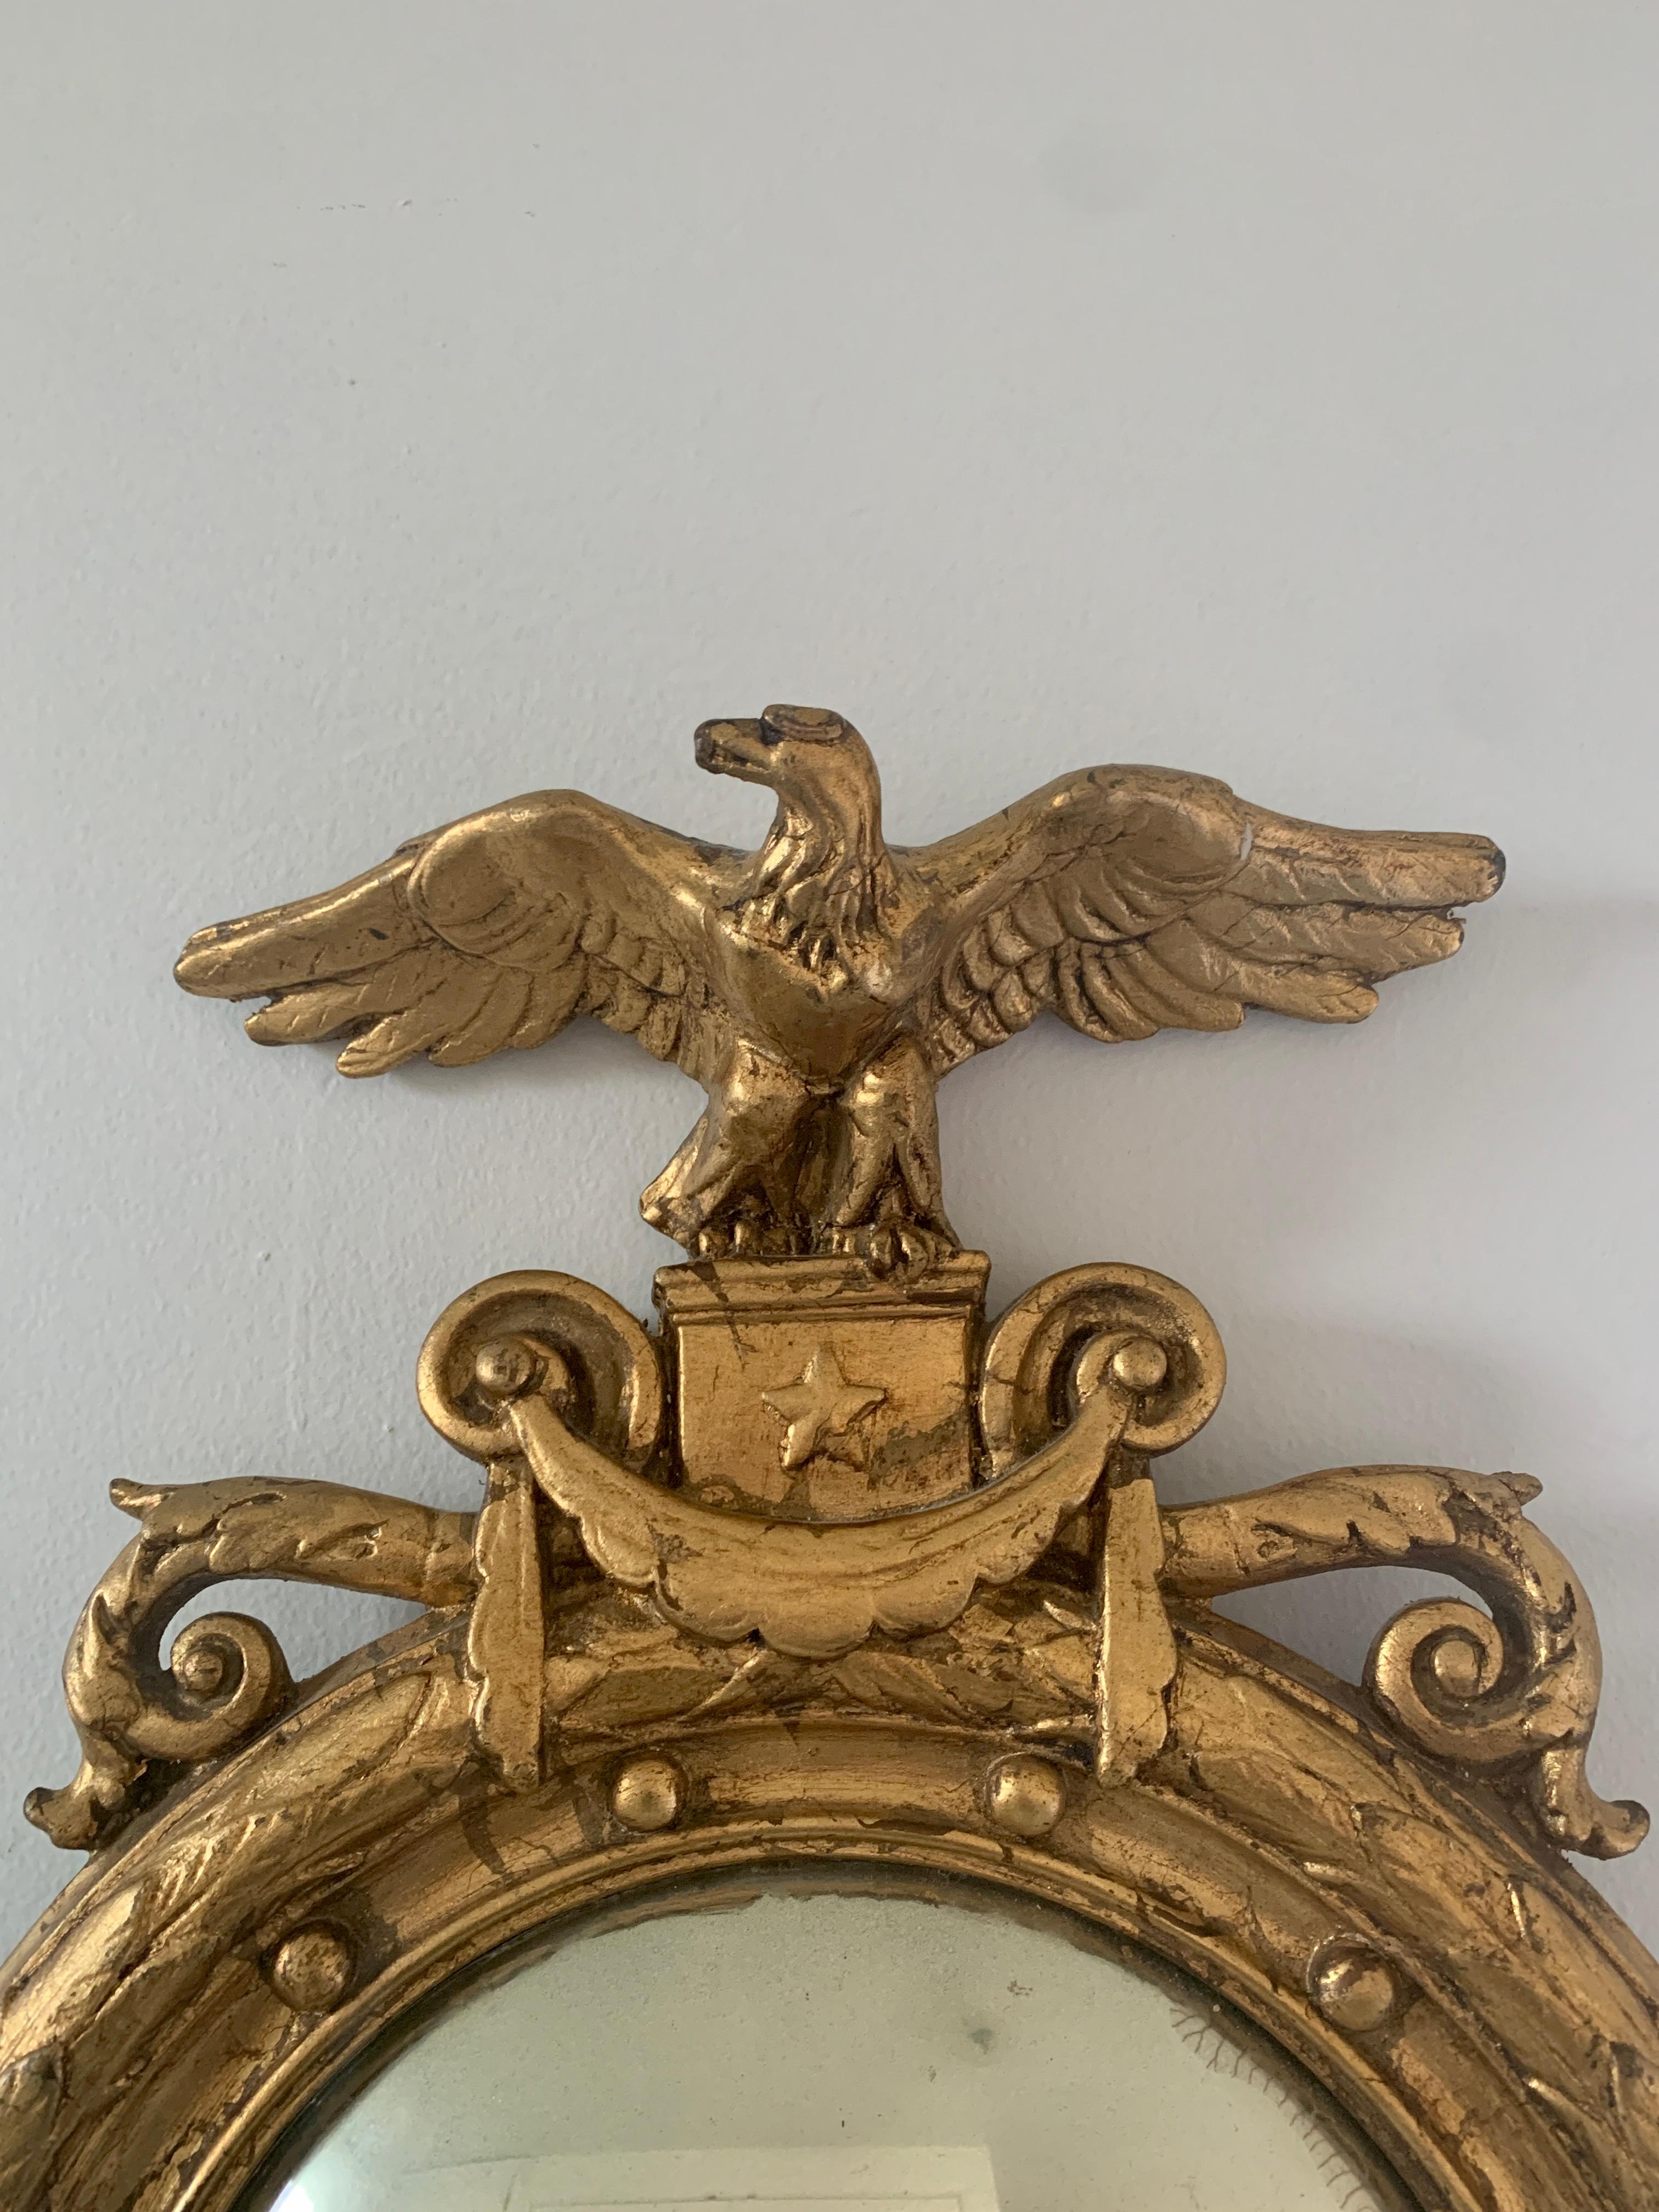 A gorgeous Federal or Regency style convex bullseye wall mirror featuring a carved eagle with open wings and 13 small spheres representing the original 13 colonies around the inside perimeter.

USA, Mid-19th Century

Giltwood frame, with